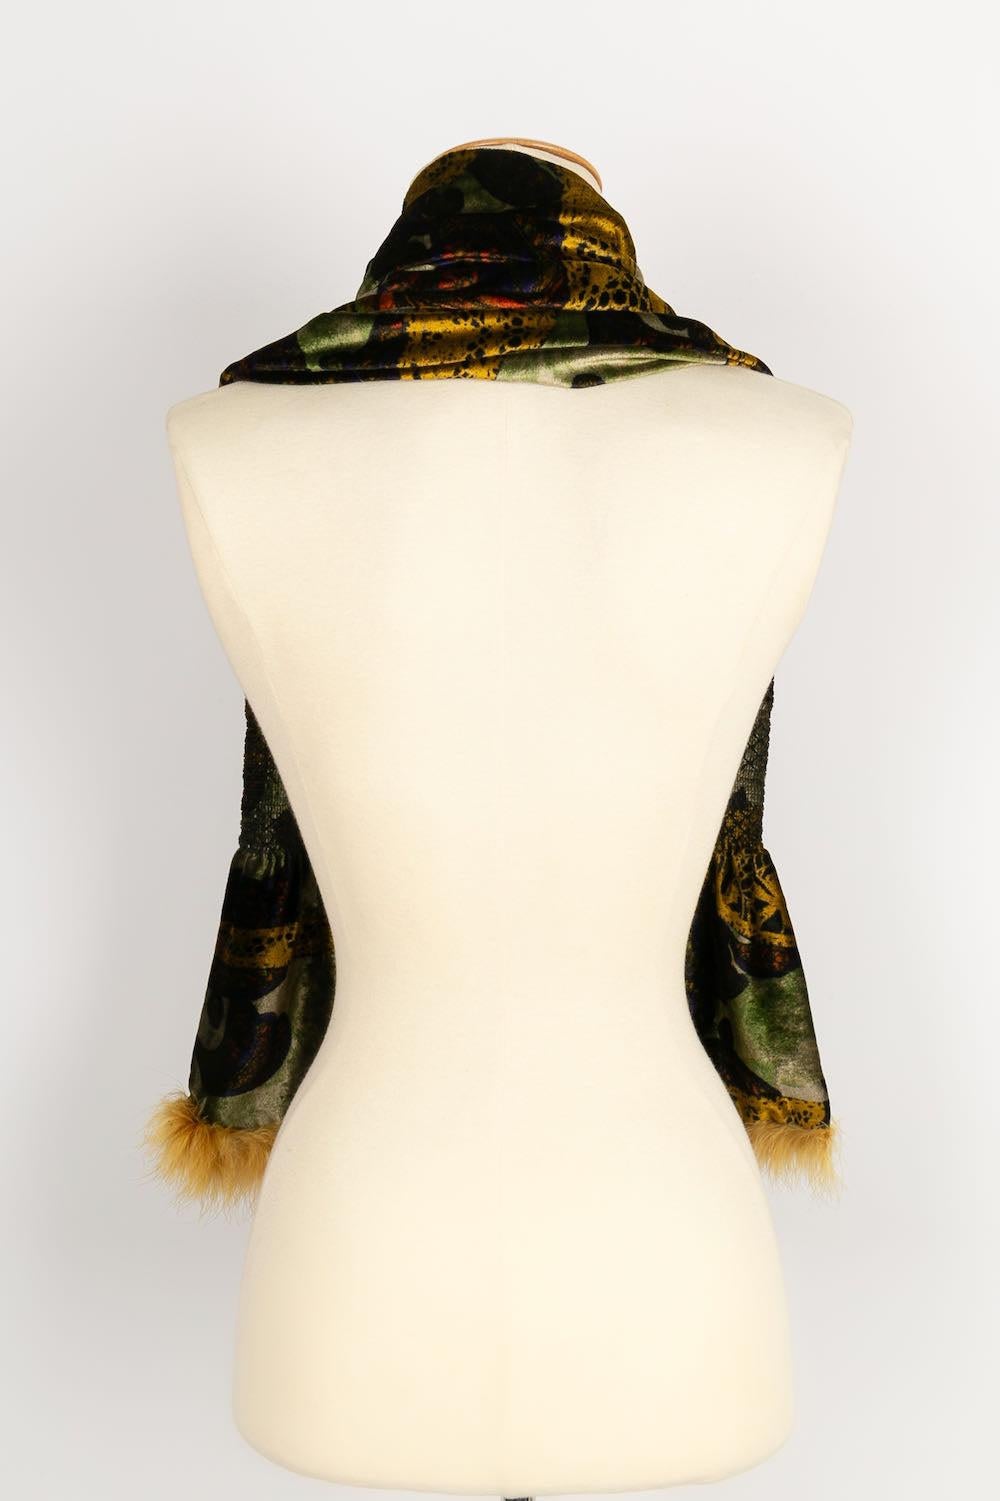 Christian Lacroix - Velvet scarf in shades of green and yellow
 
 Additional information:
Dimensions: Length: 133 cm, Height: 29 cm
Condition: Very good condition
Seller Ref number: ACC19